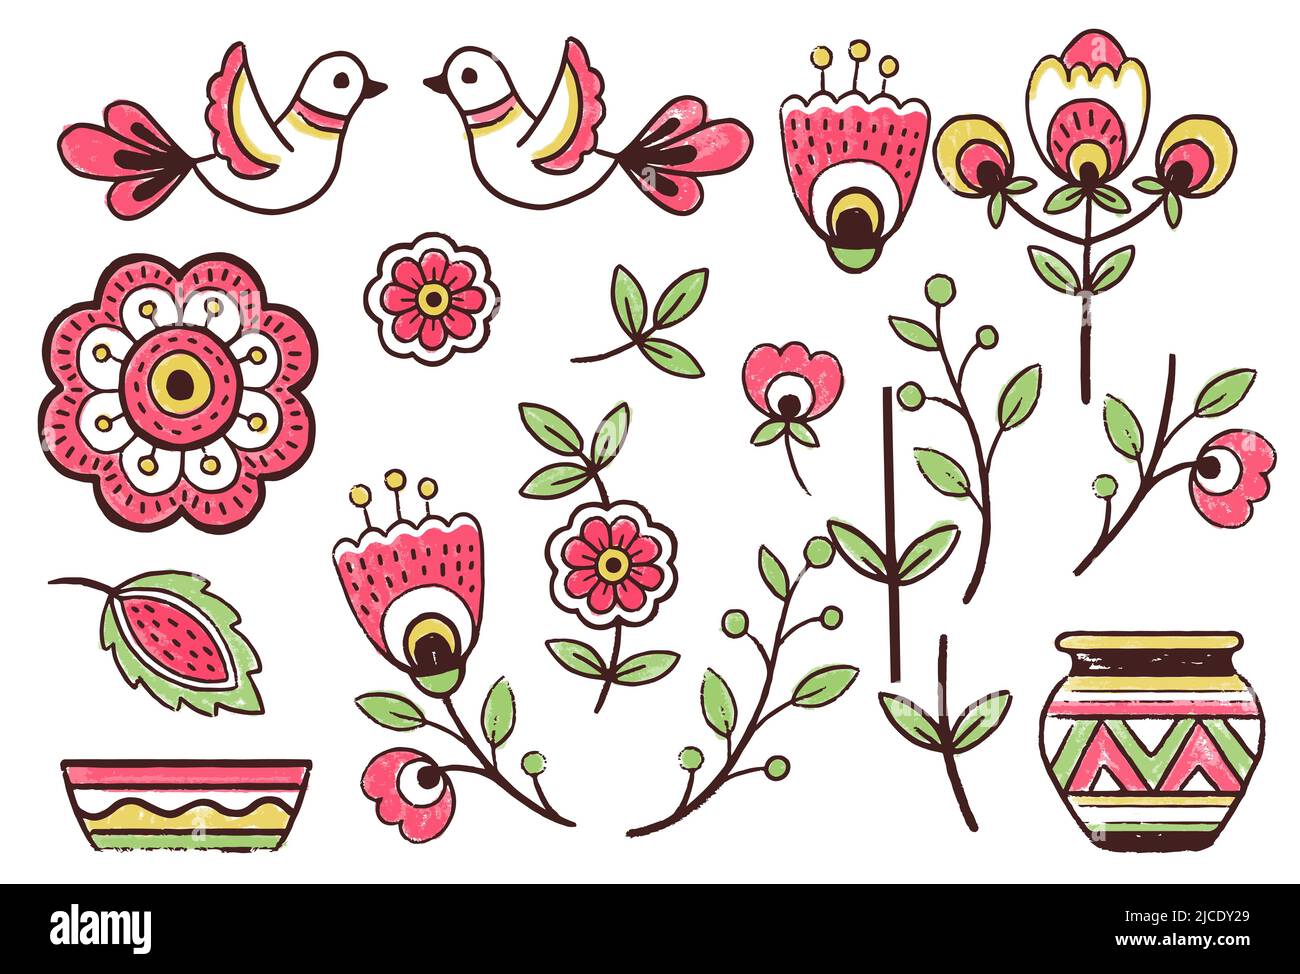 Vector set elements. Pattern design in the styles of Ukrainian folk traditional embroidery. Hand draw flowers elements, foliage and birds Stock Vector